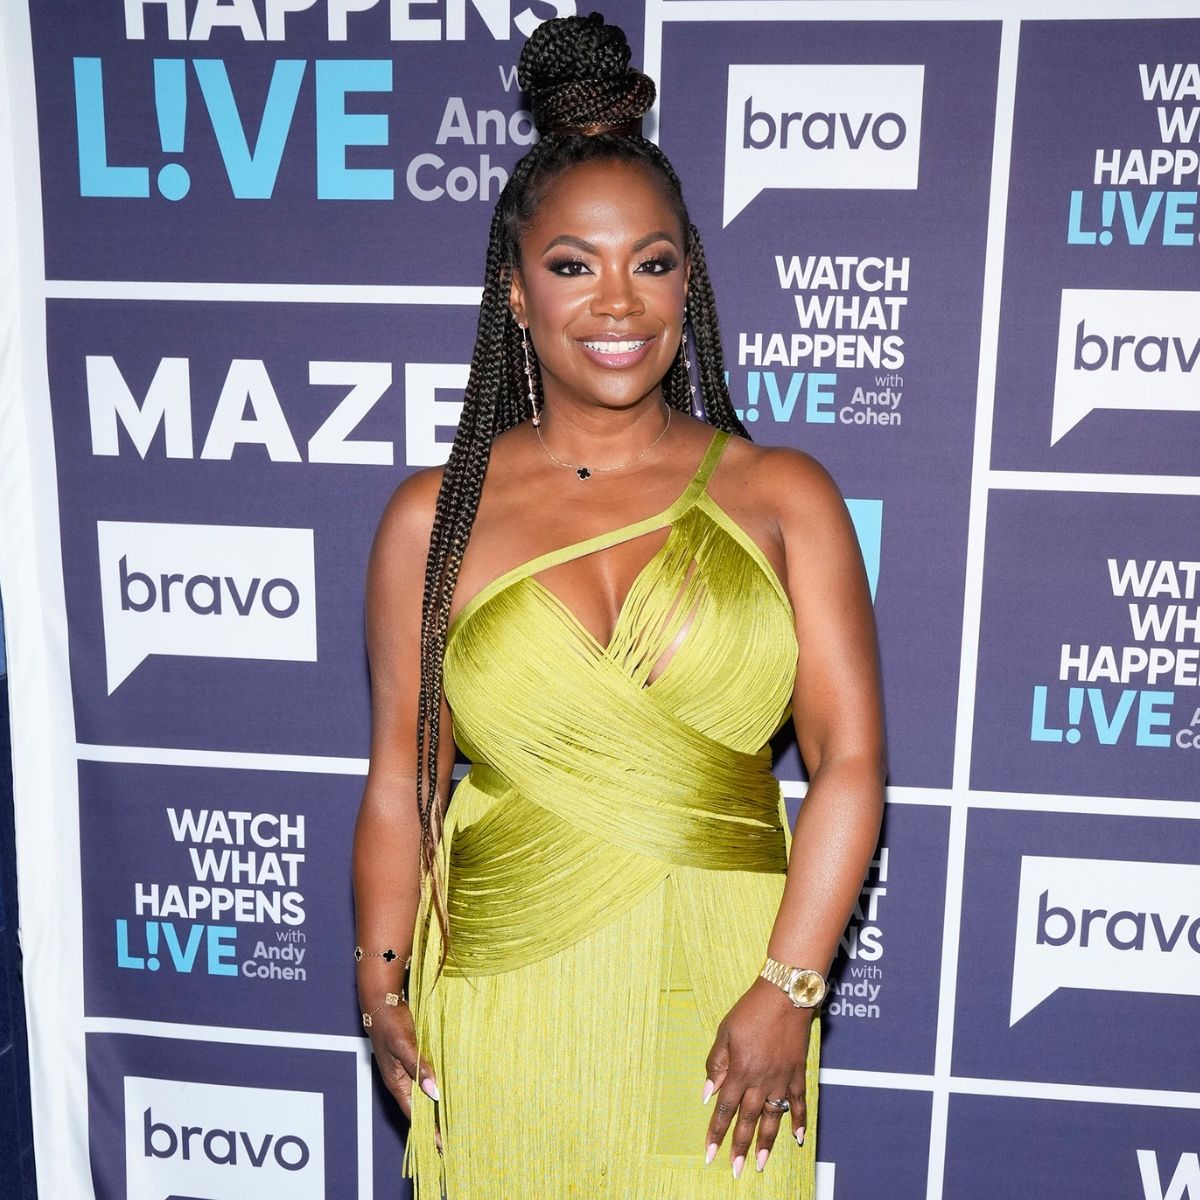 These $14.99 Home Finds From RHOA’s Kandi Burruss Are Worldwide